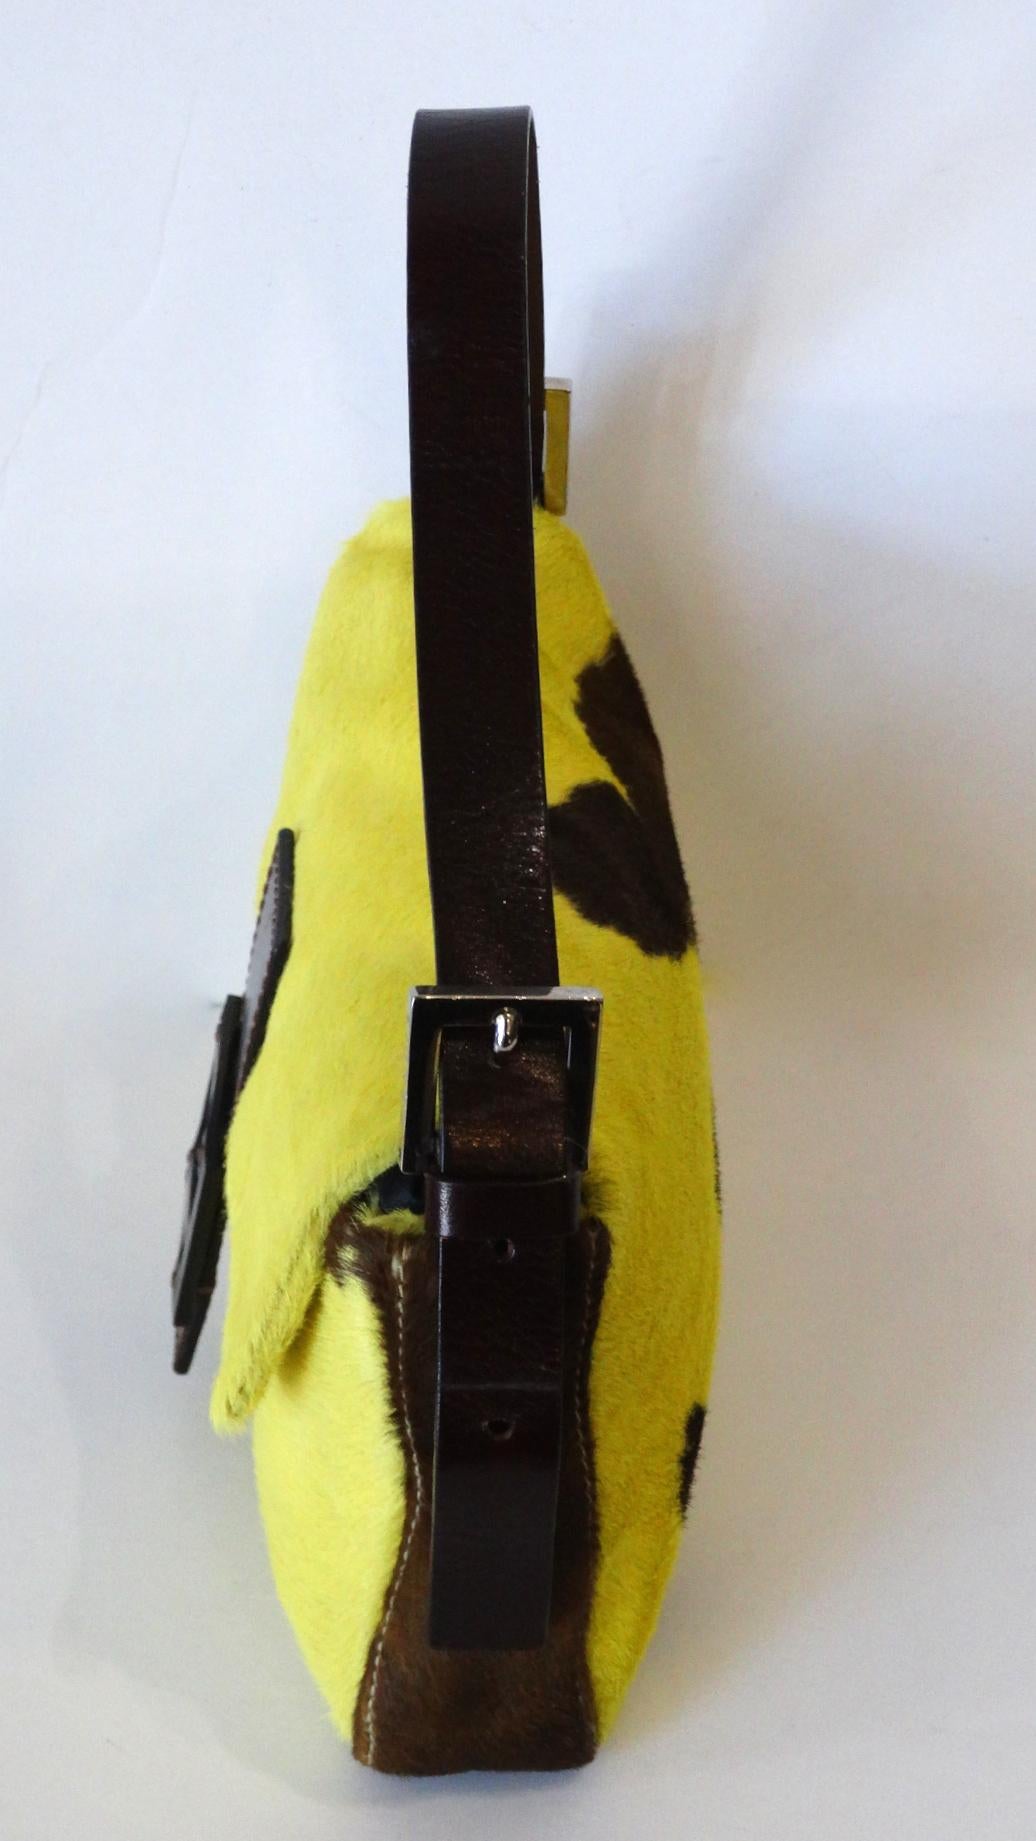 The most amazing version of the 2000s Fendi Baguette we've seen yet! Shocking bright yellow pony hair with contrasting dark brown cow spots on the back. Dark brown leather stitched around the clasp, featuring matching brown Fendi Monogram hardware.